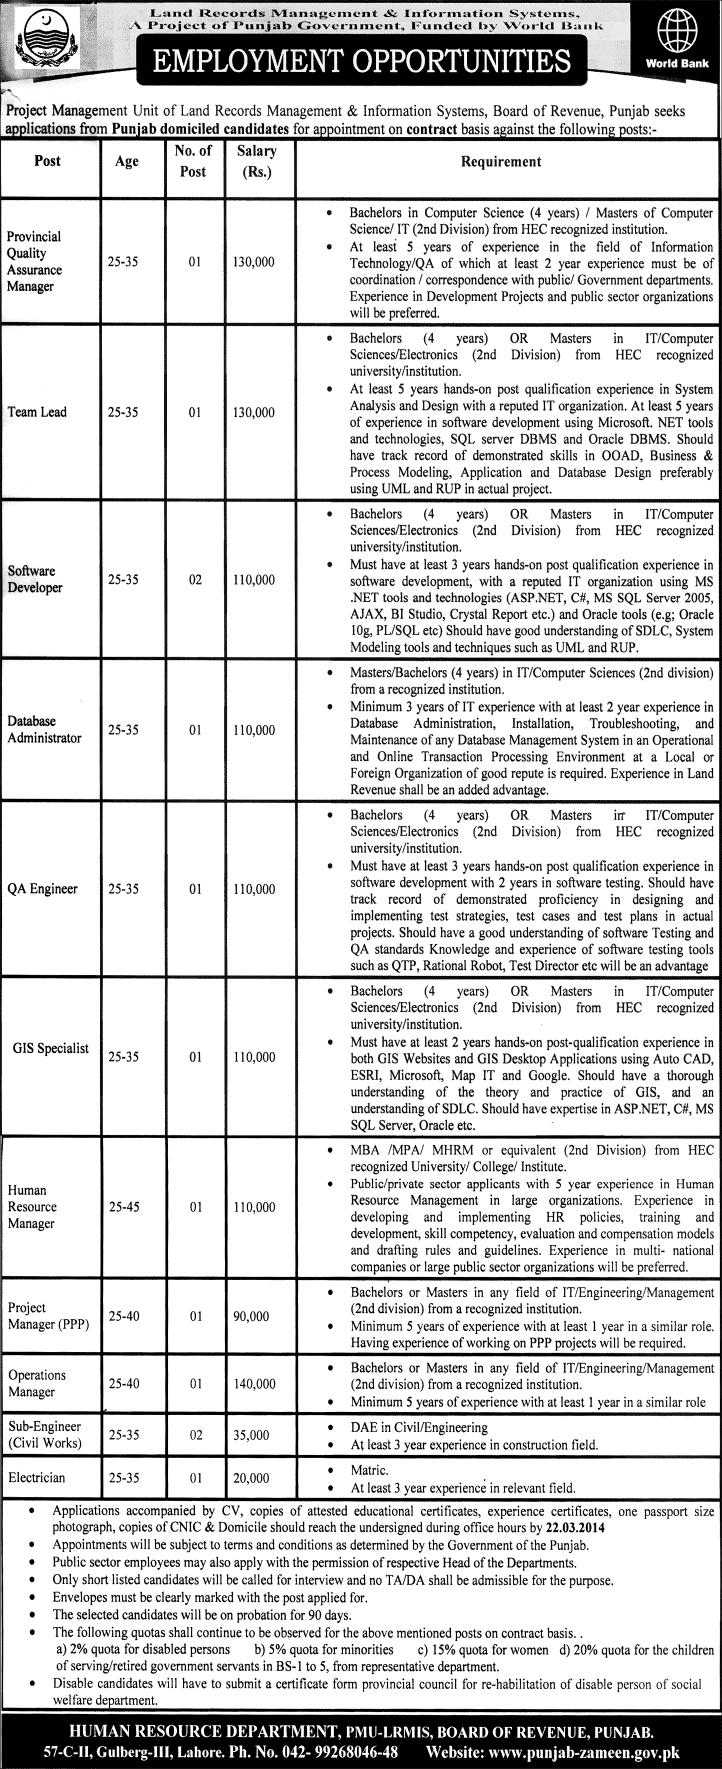 LRMIS Jobs March 2014 Land Records Management & Information Systems